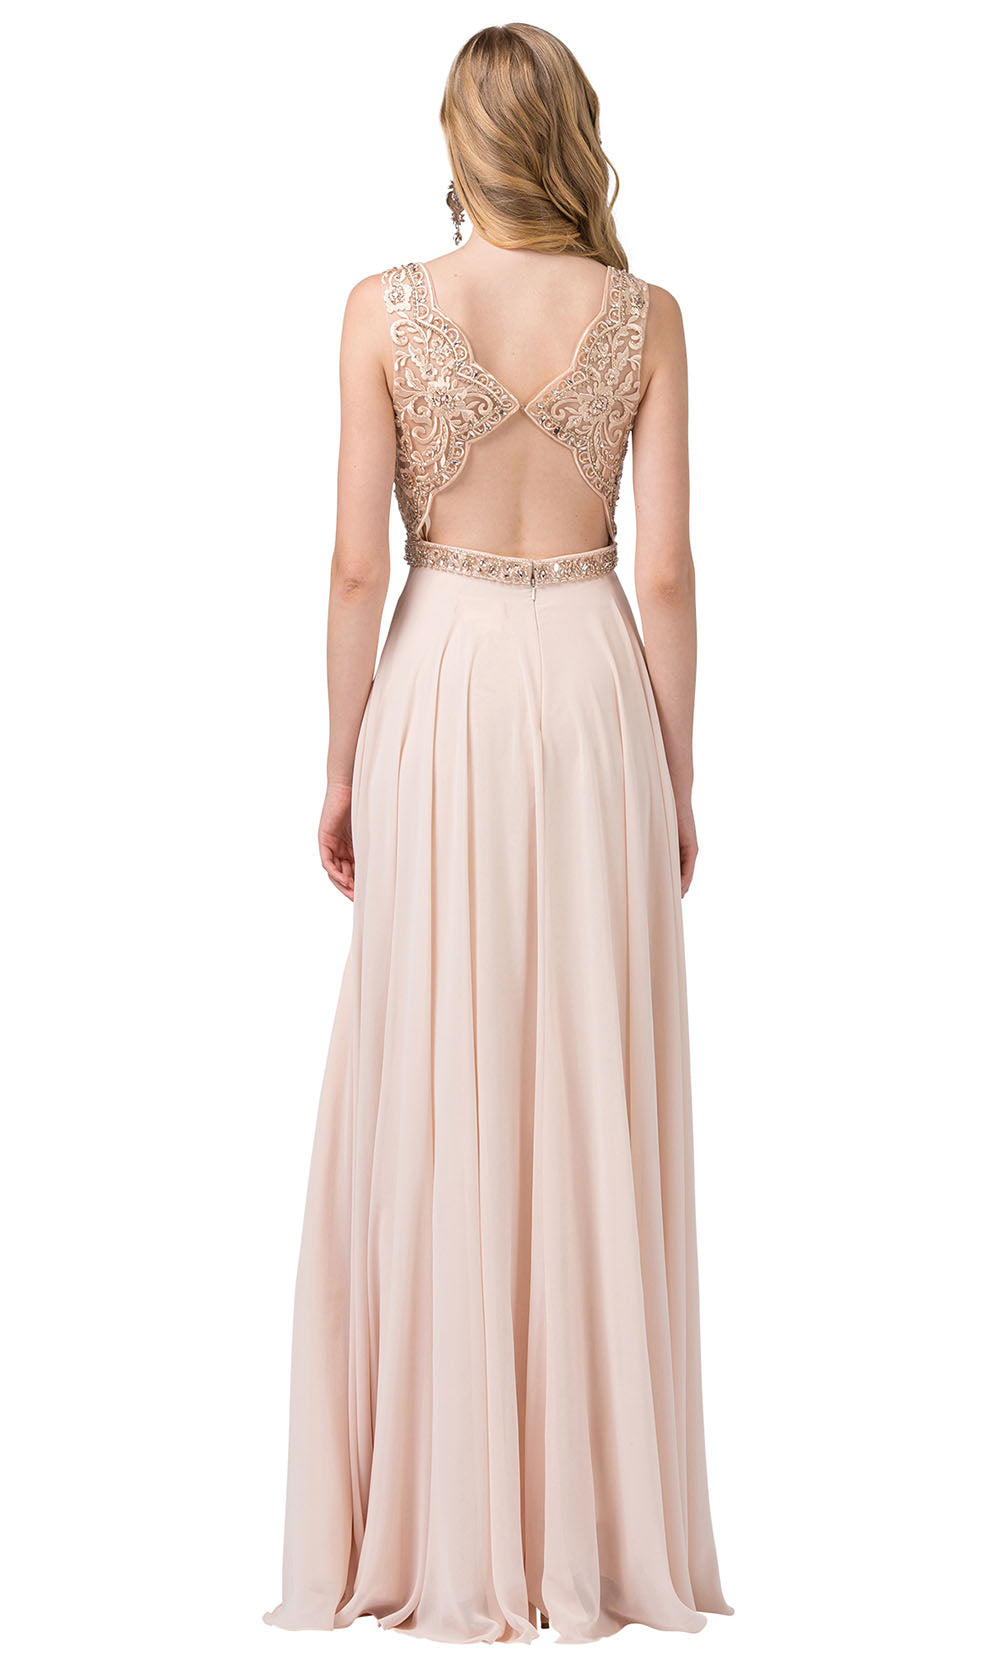 Dancing Queen - 2552 Scalloped Embroidered A-Line Dress In Champagne & Gold